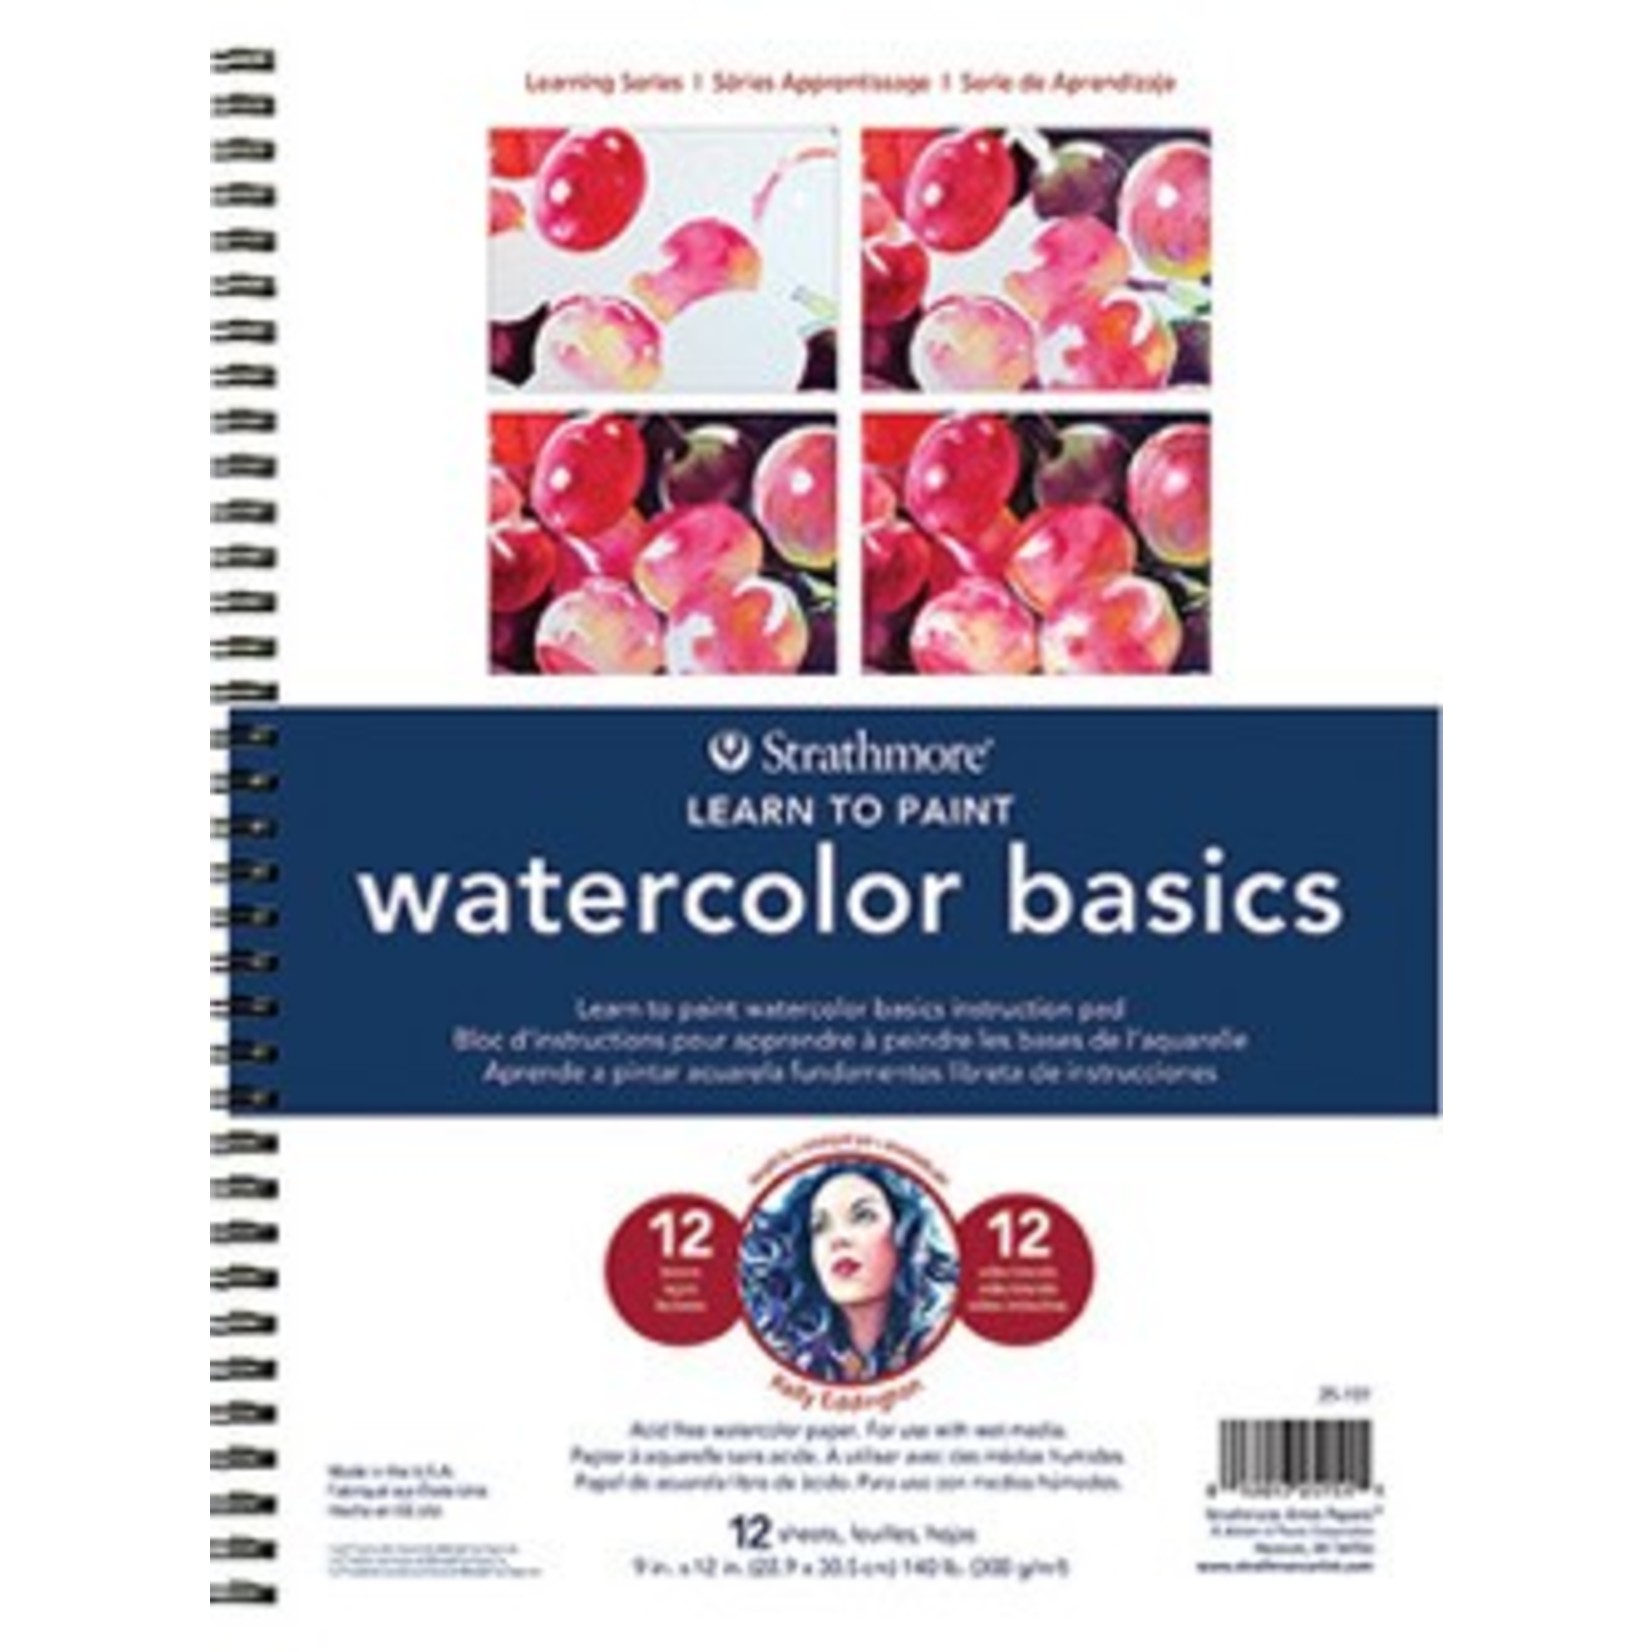 STRATHMORE STRATHMORE LEARNING SERIES LEARN TO PAINT WATERCOLOUR BASICS 9X12 COIL BOUND    025-151